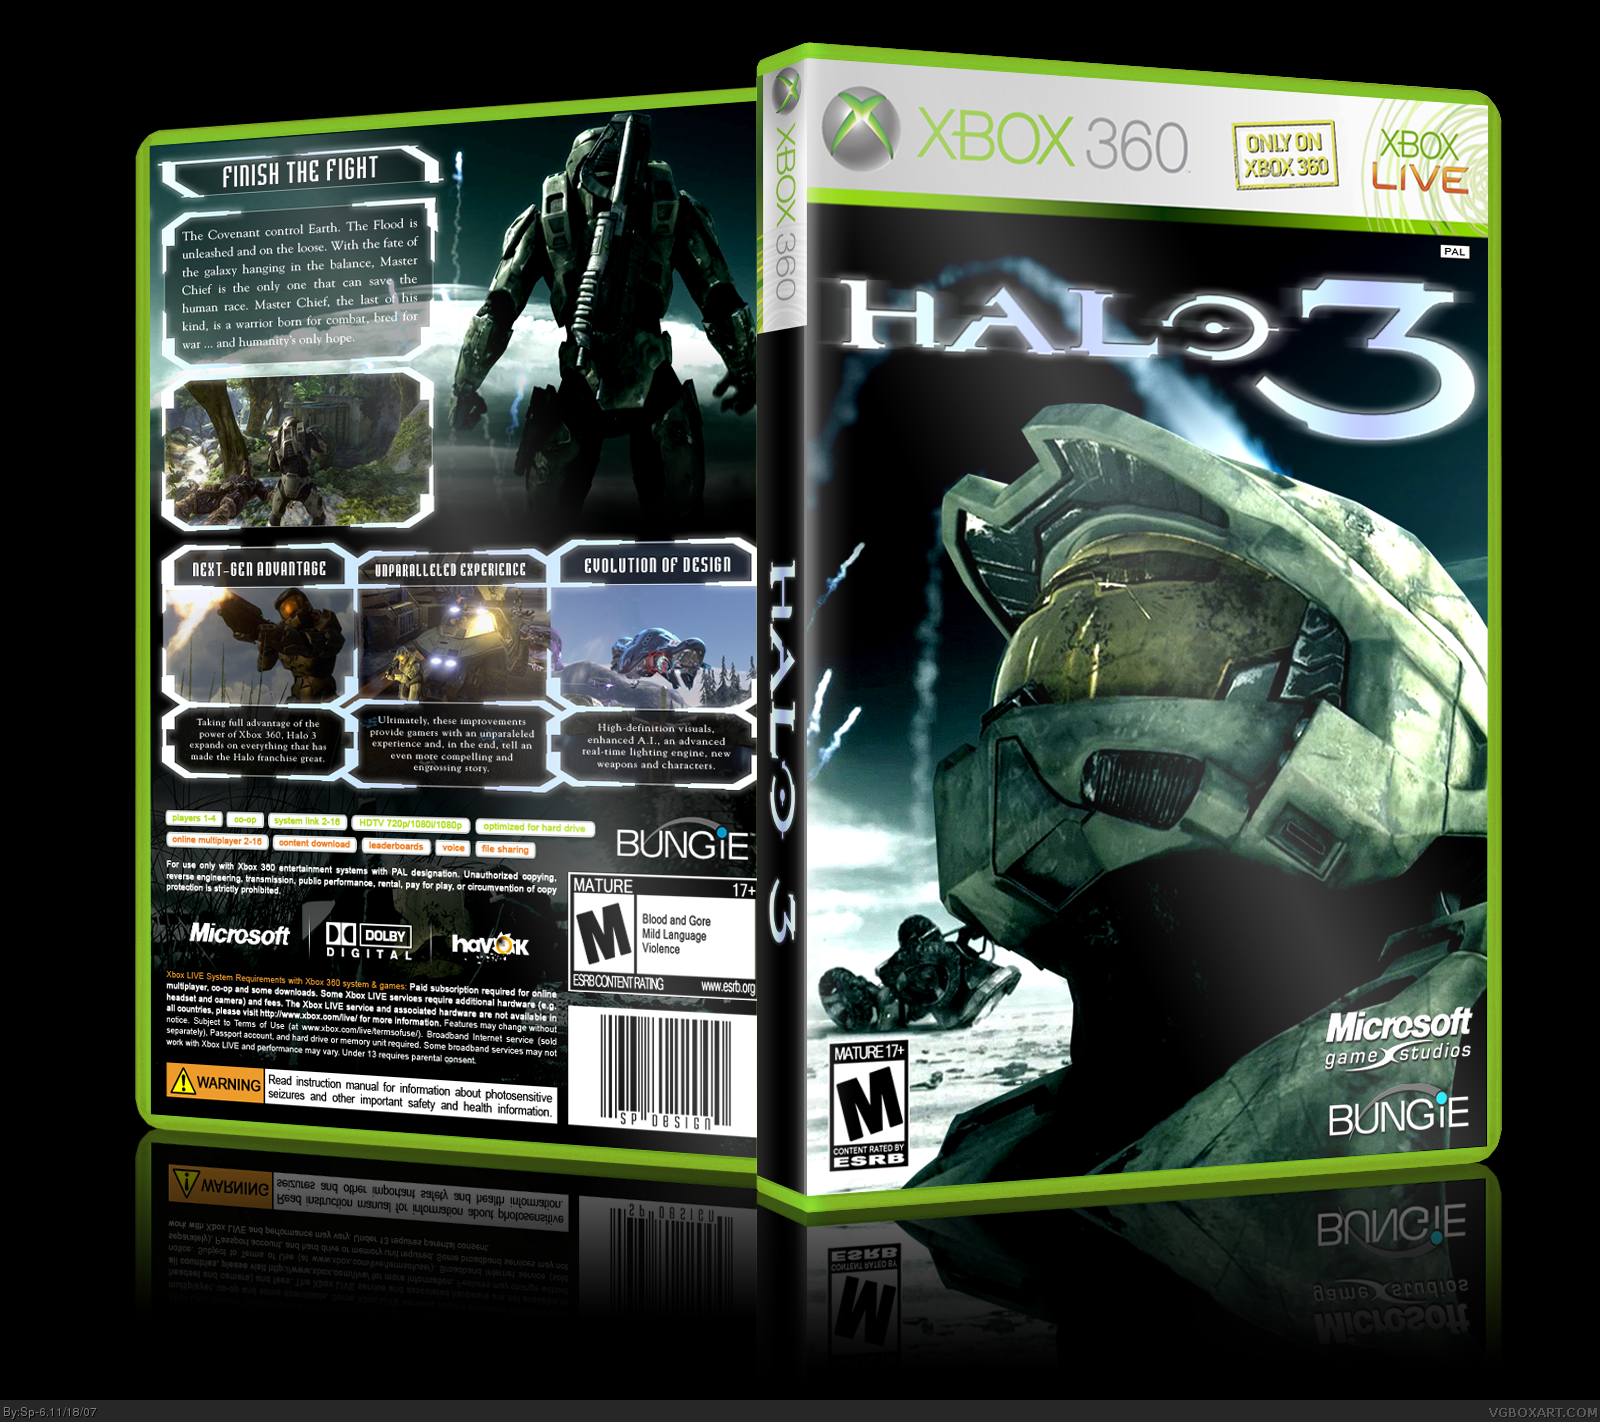 Viewing full size Halo 3 box cover